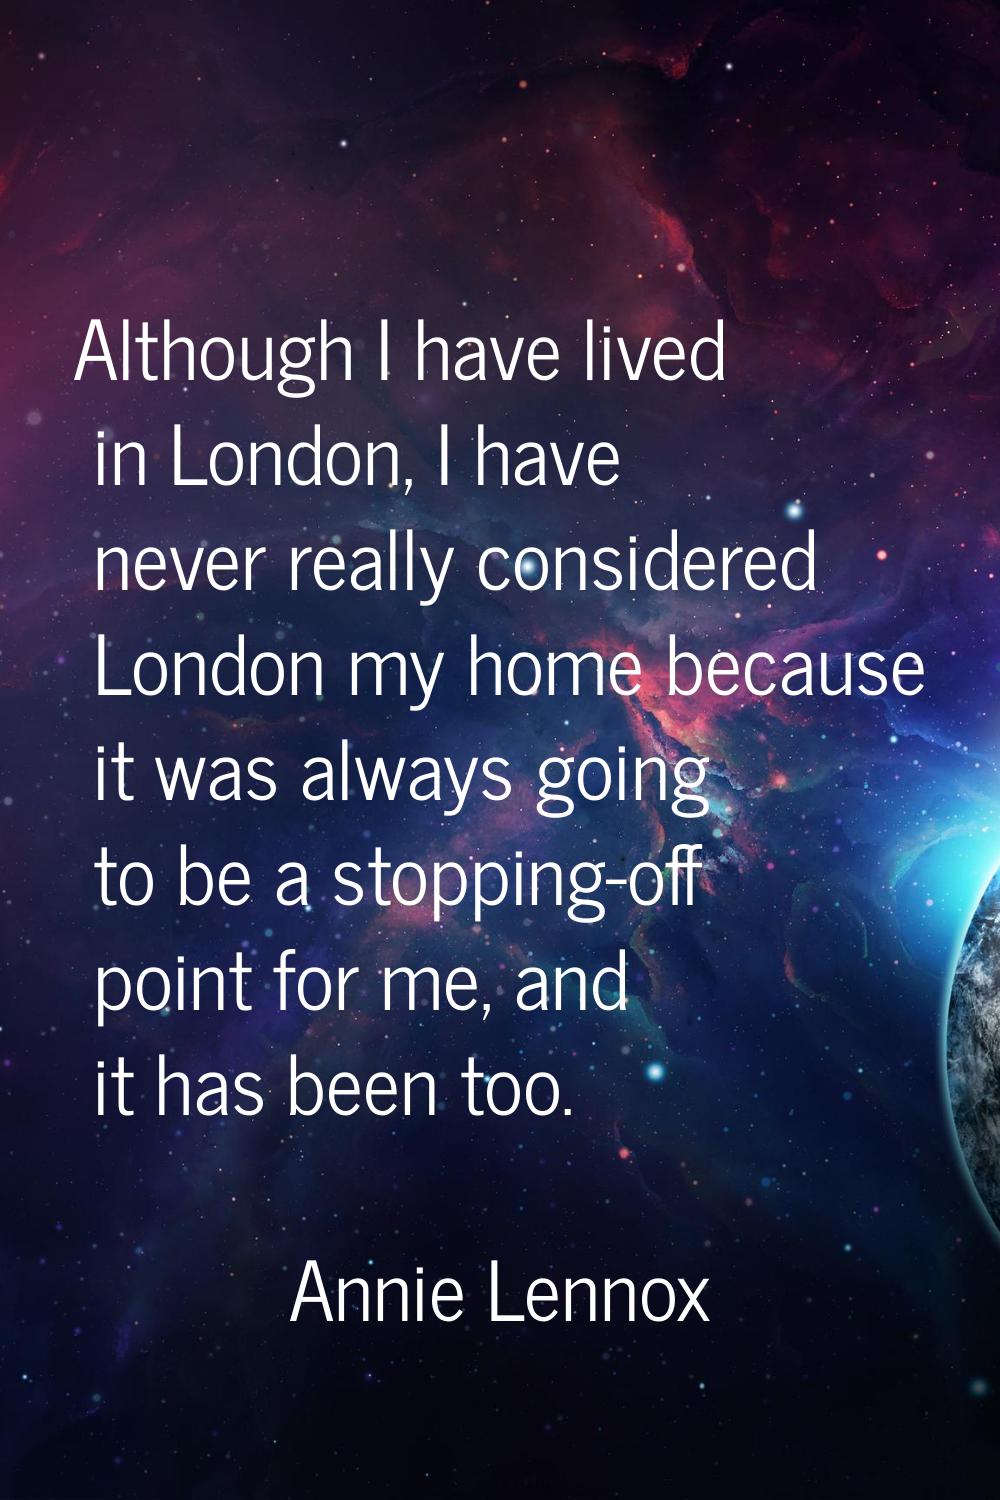 Although I have lived in London, I have never really considered London my home because it was alway